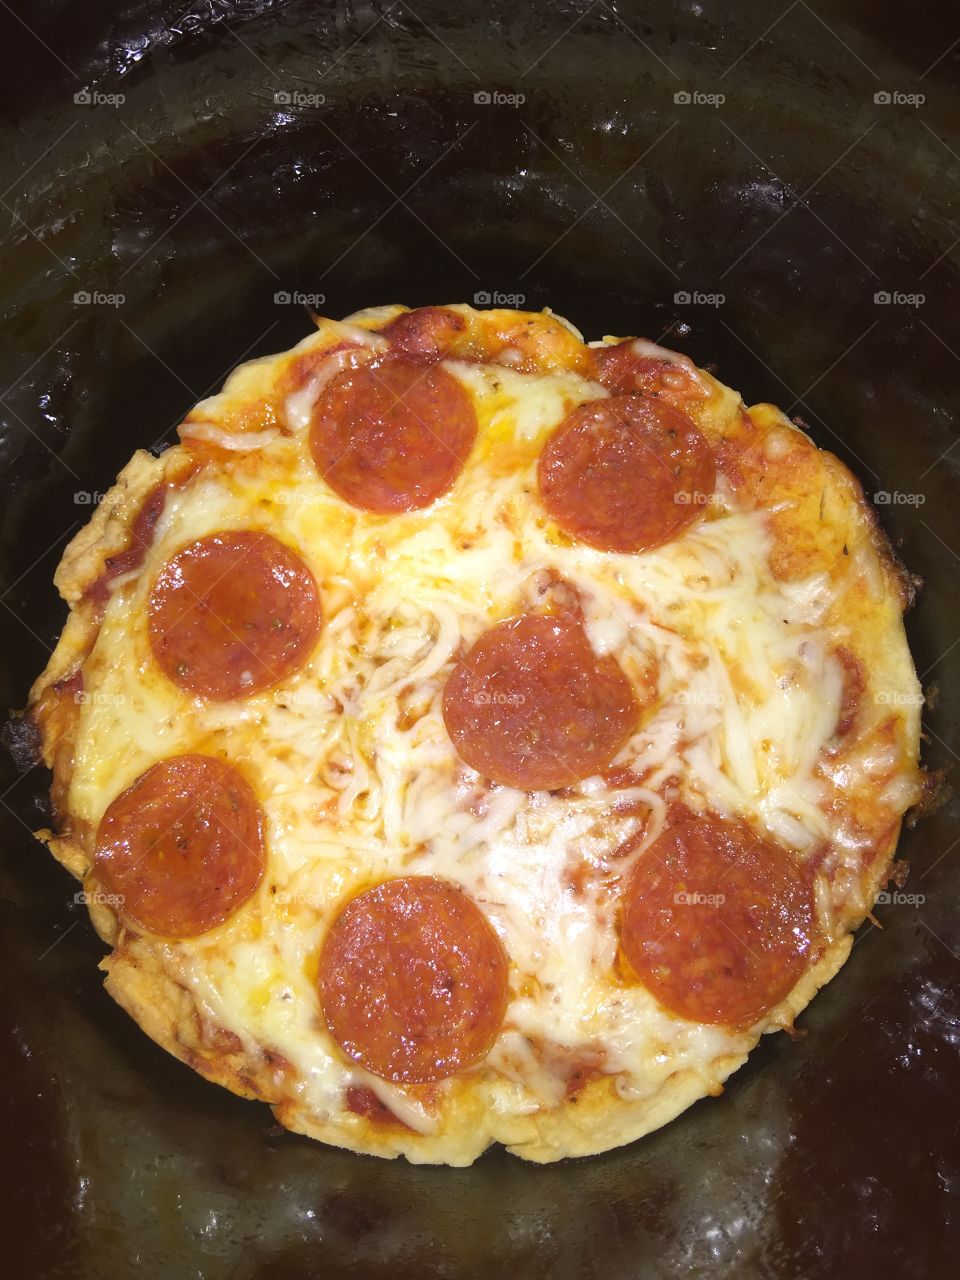 Yum crock pot pizza easy peezy try it it’s what’s for dinner 